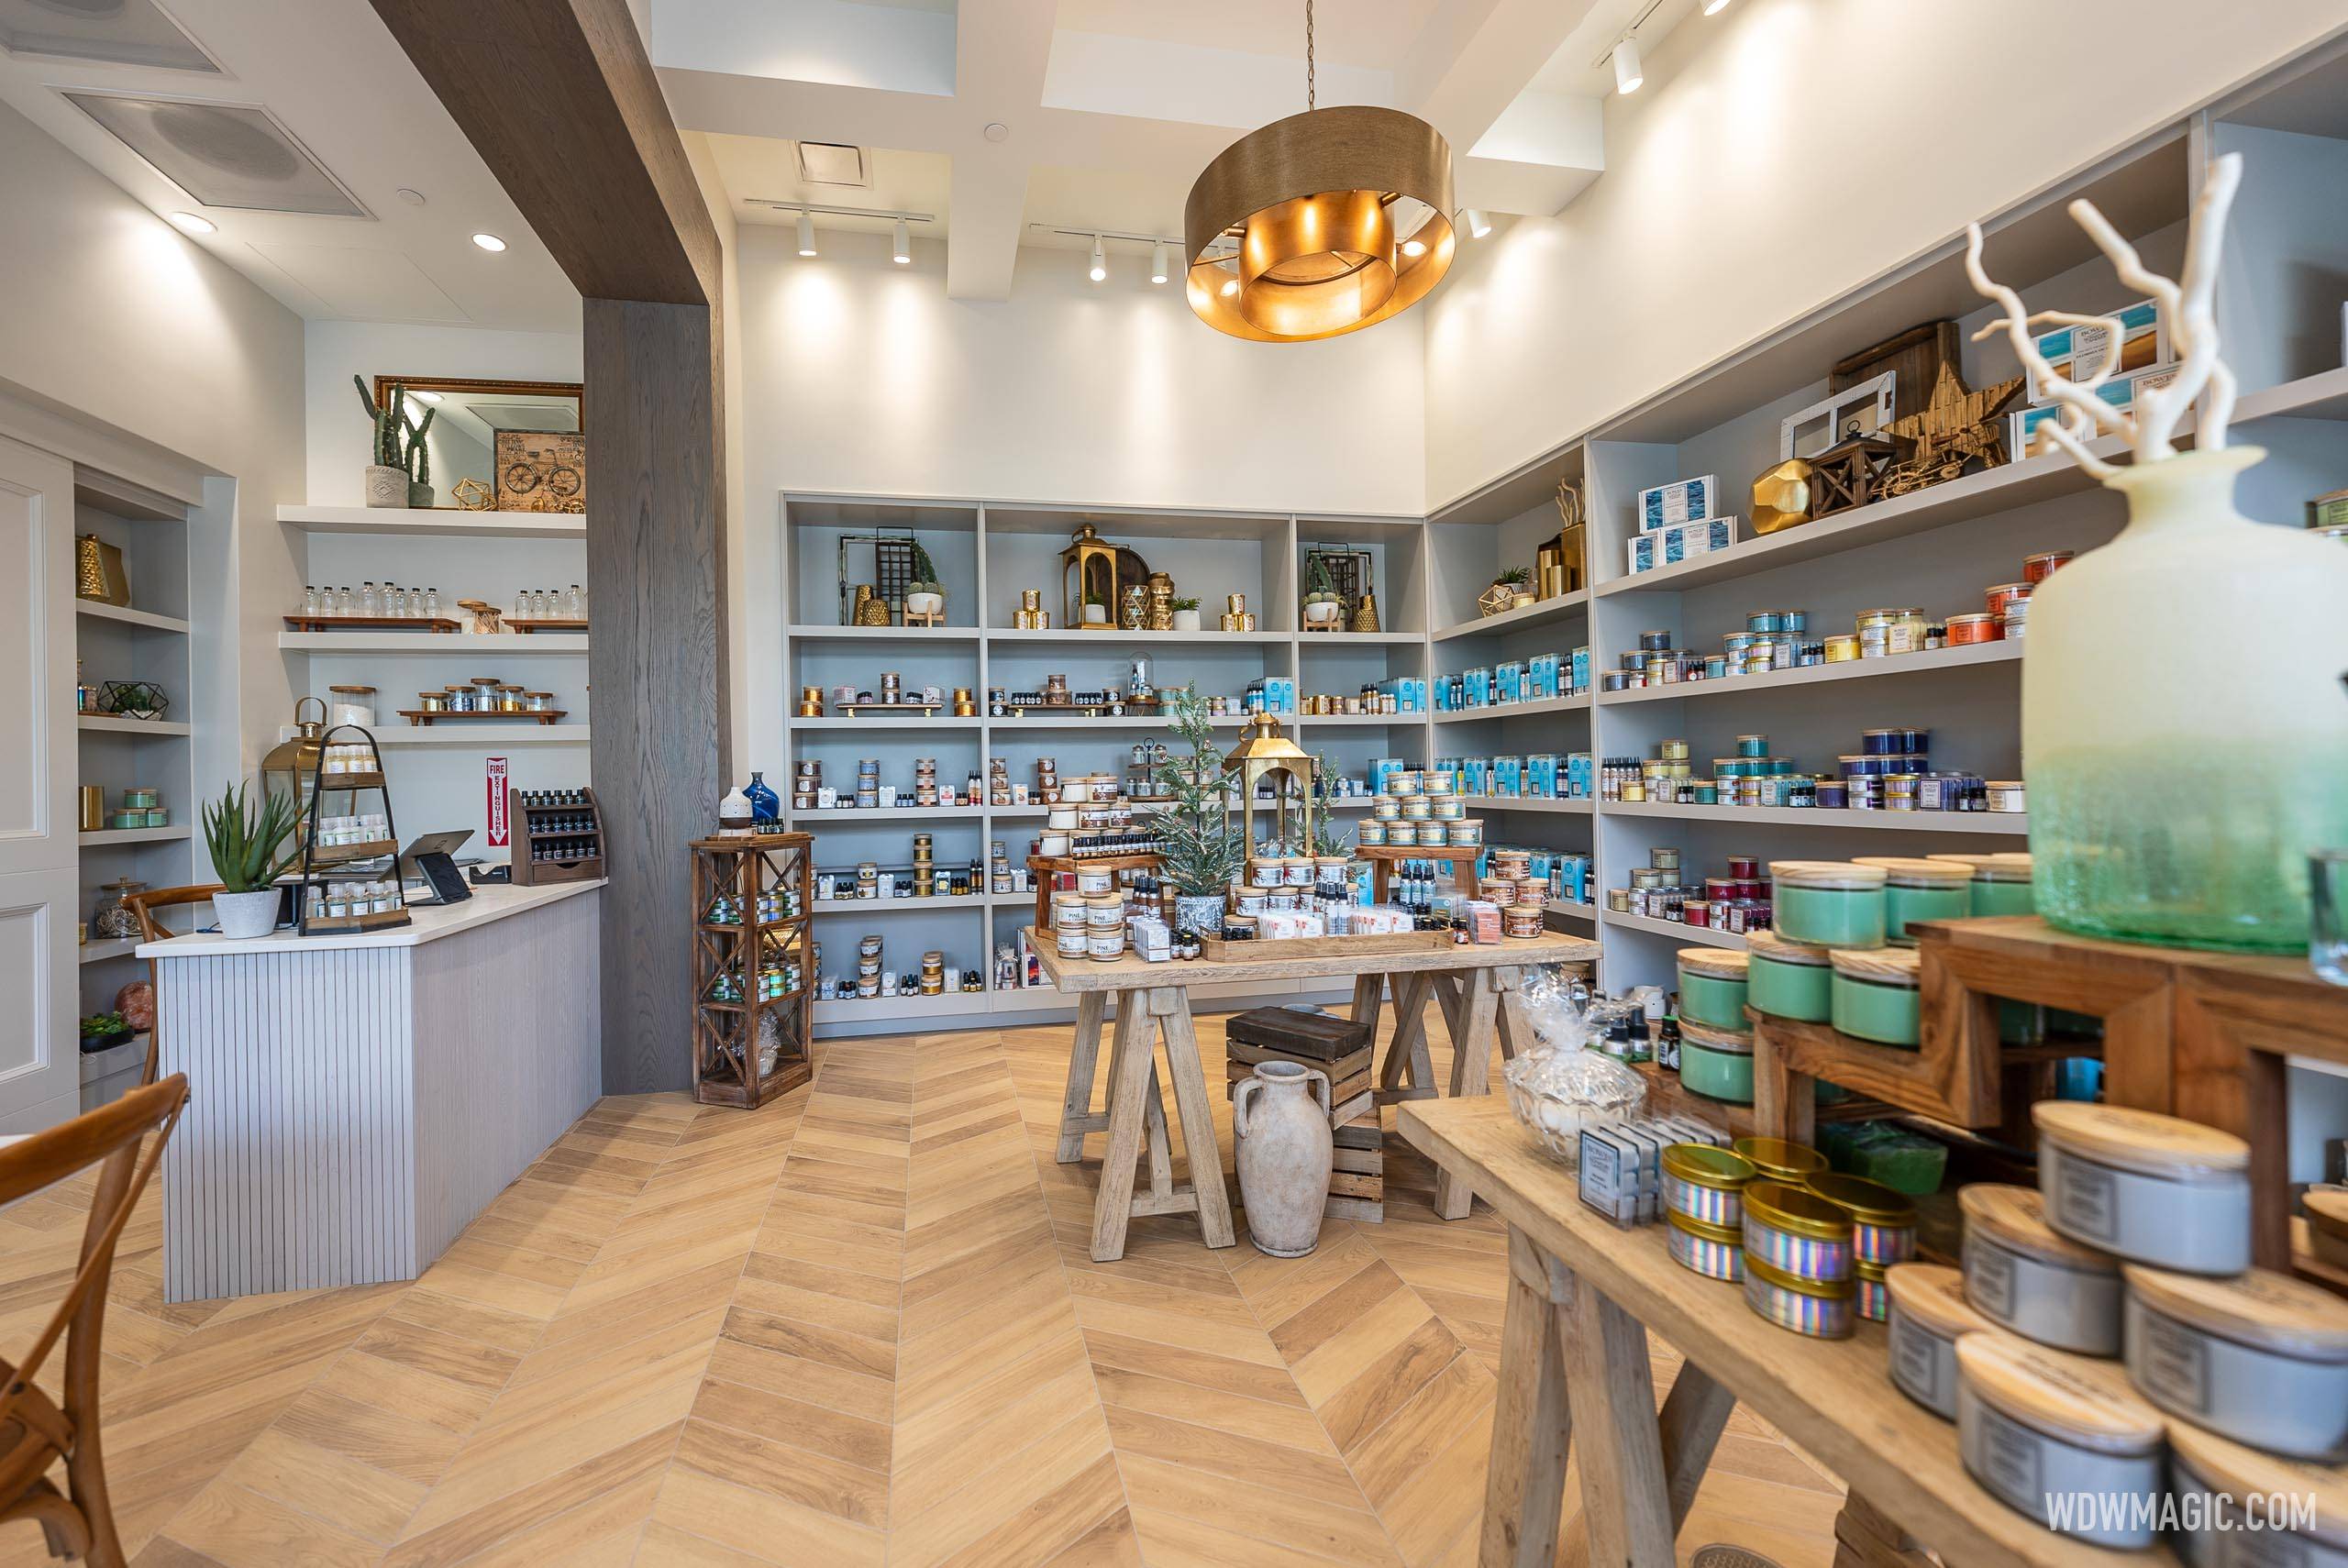 Bowes Signature Candles now open in new location at Disney Springs